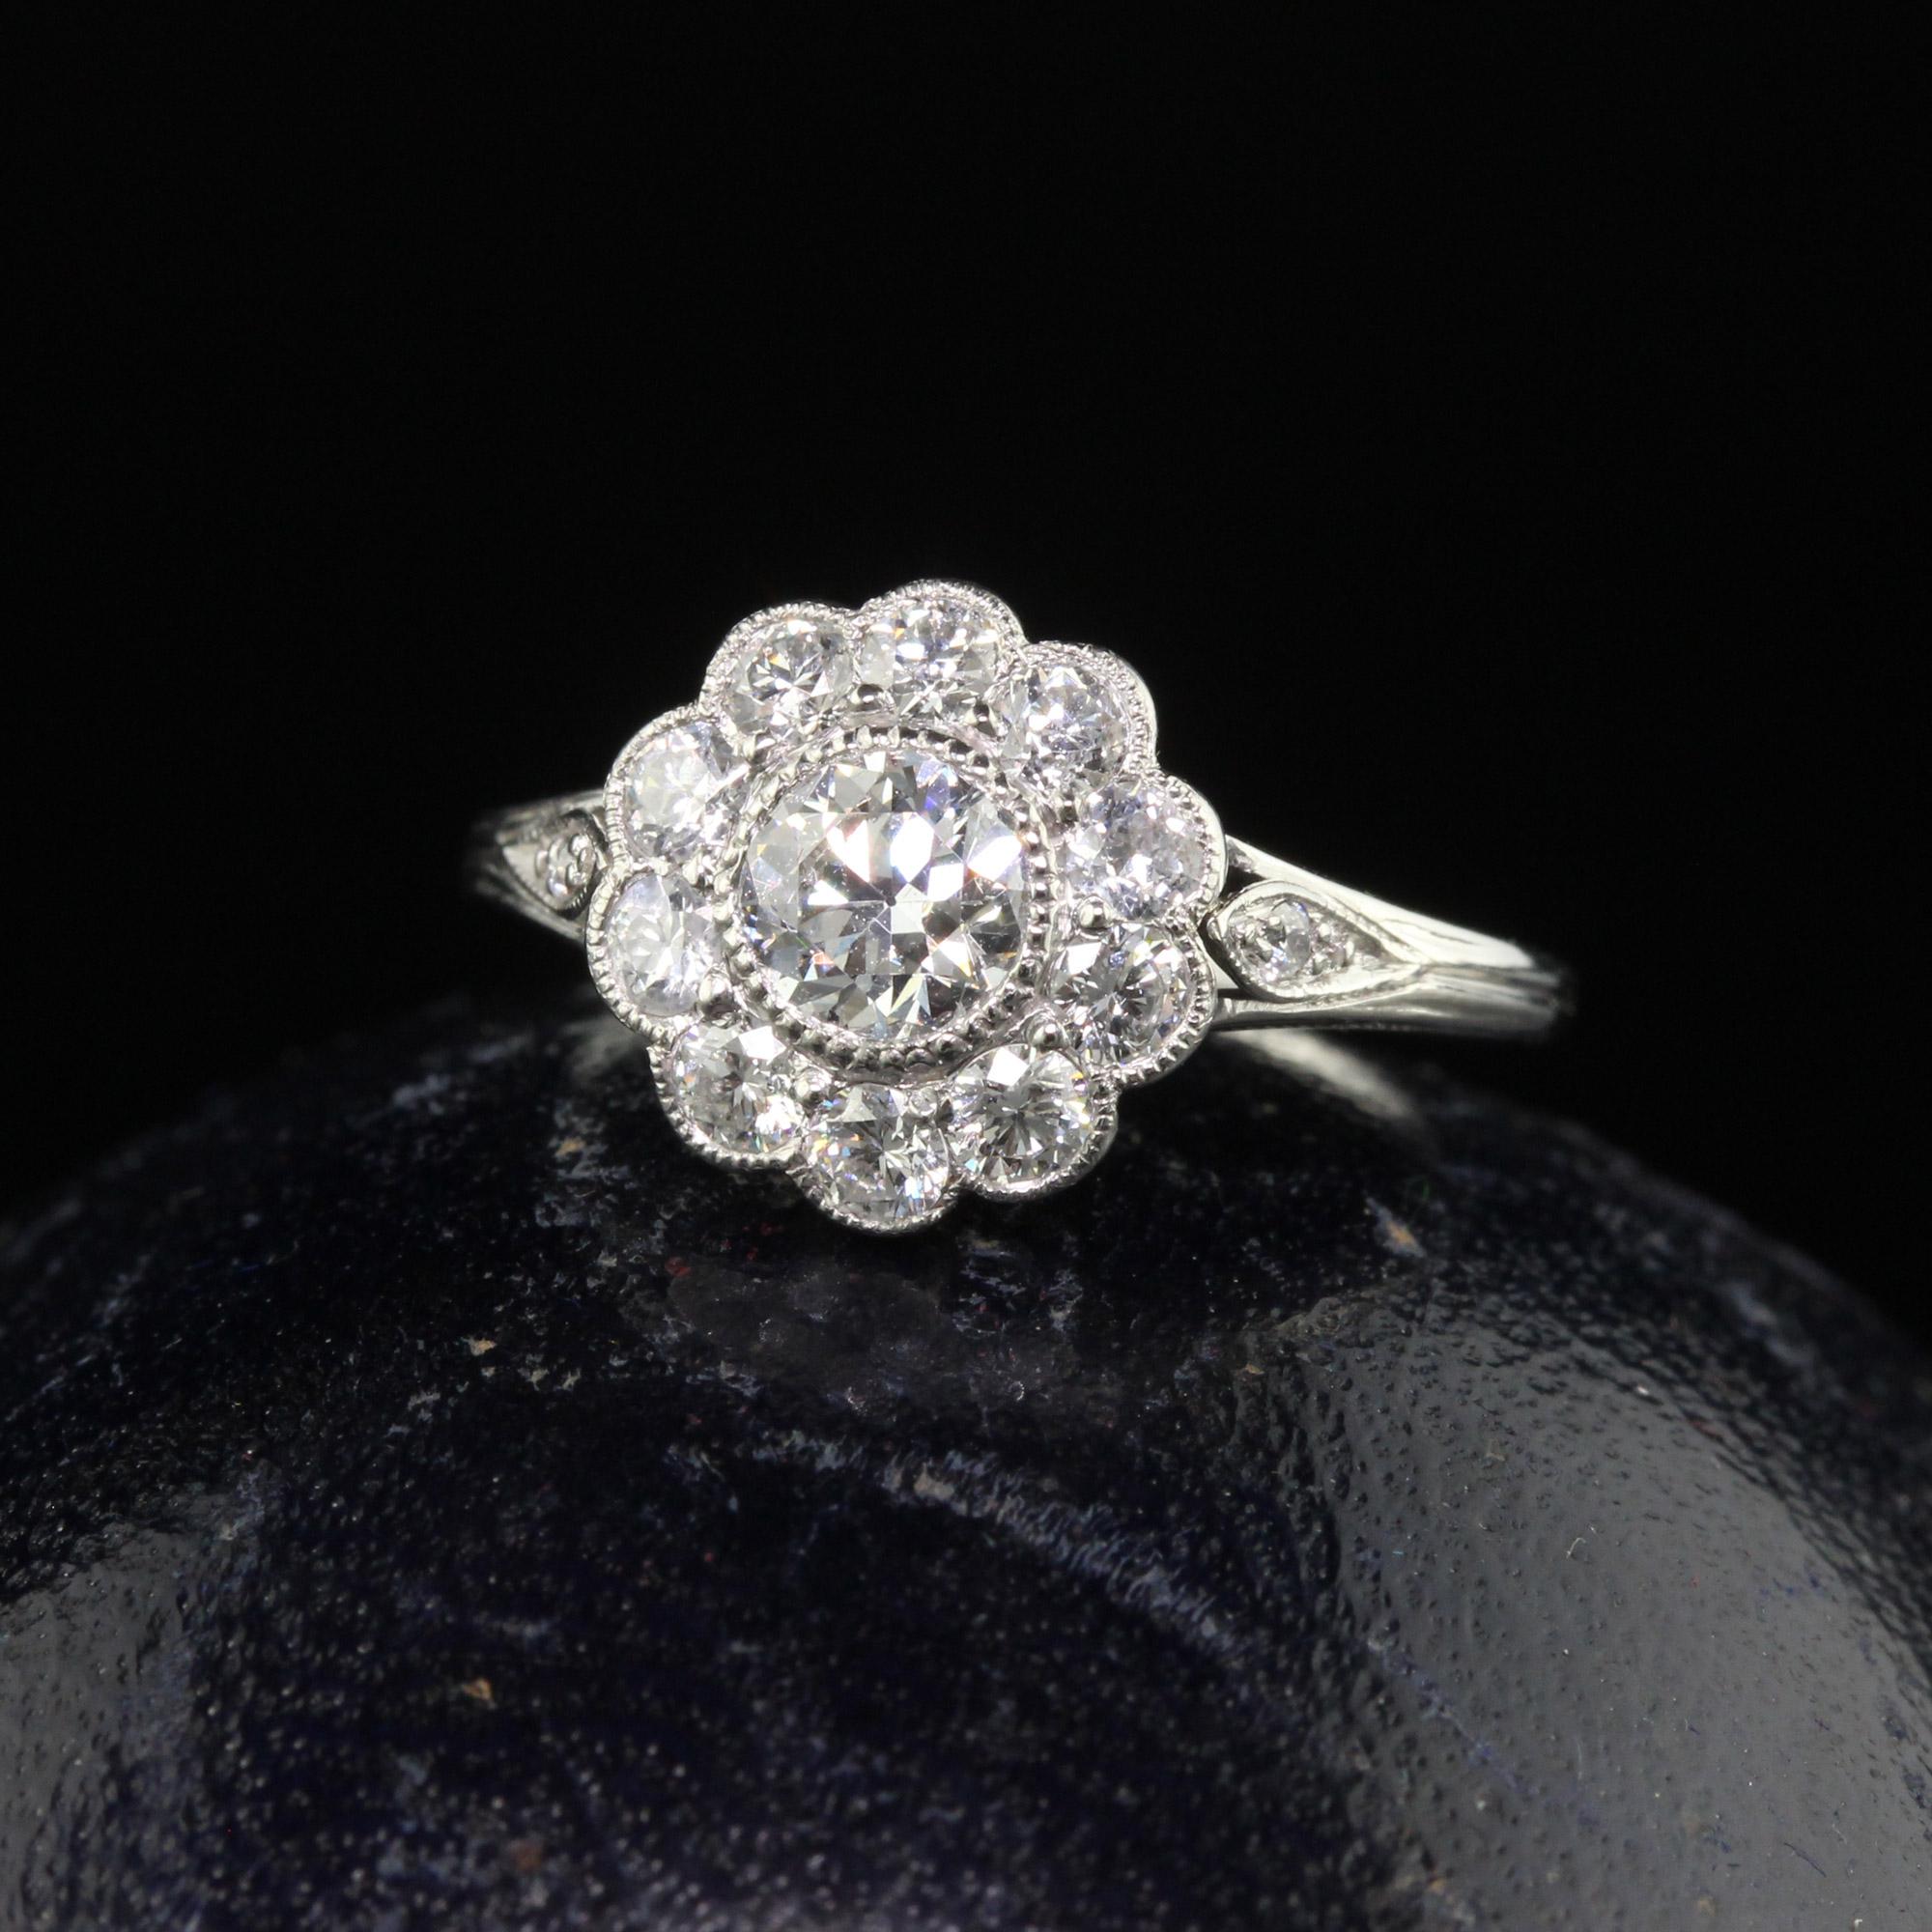 Beautiful Antique Edwardian Tiffany and Co Platinum Old Euro Diamond Engagement Ring. This incredible Tiffany and co engagement ring is crafted in platinum. The center holds an old European cut diamond that is surrounded by other old European cut